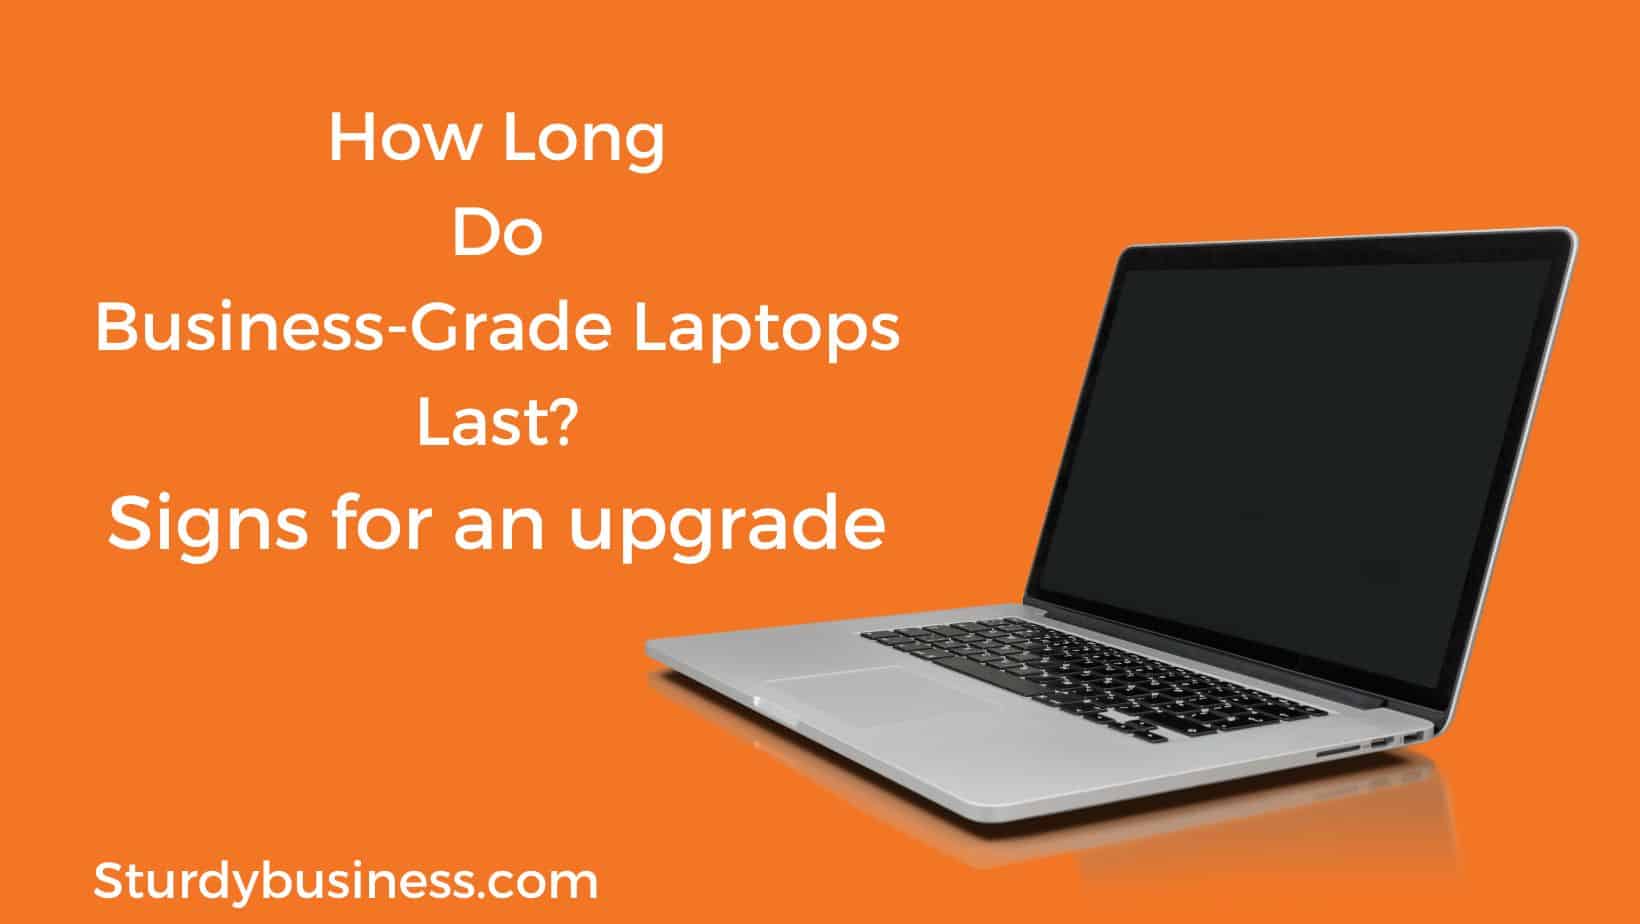 How Long Do Business-Grade Laptops Last? Signs for an upgrade